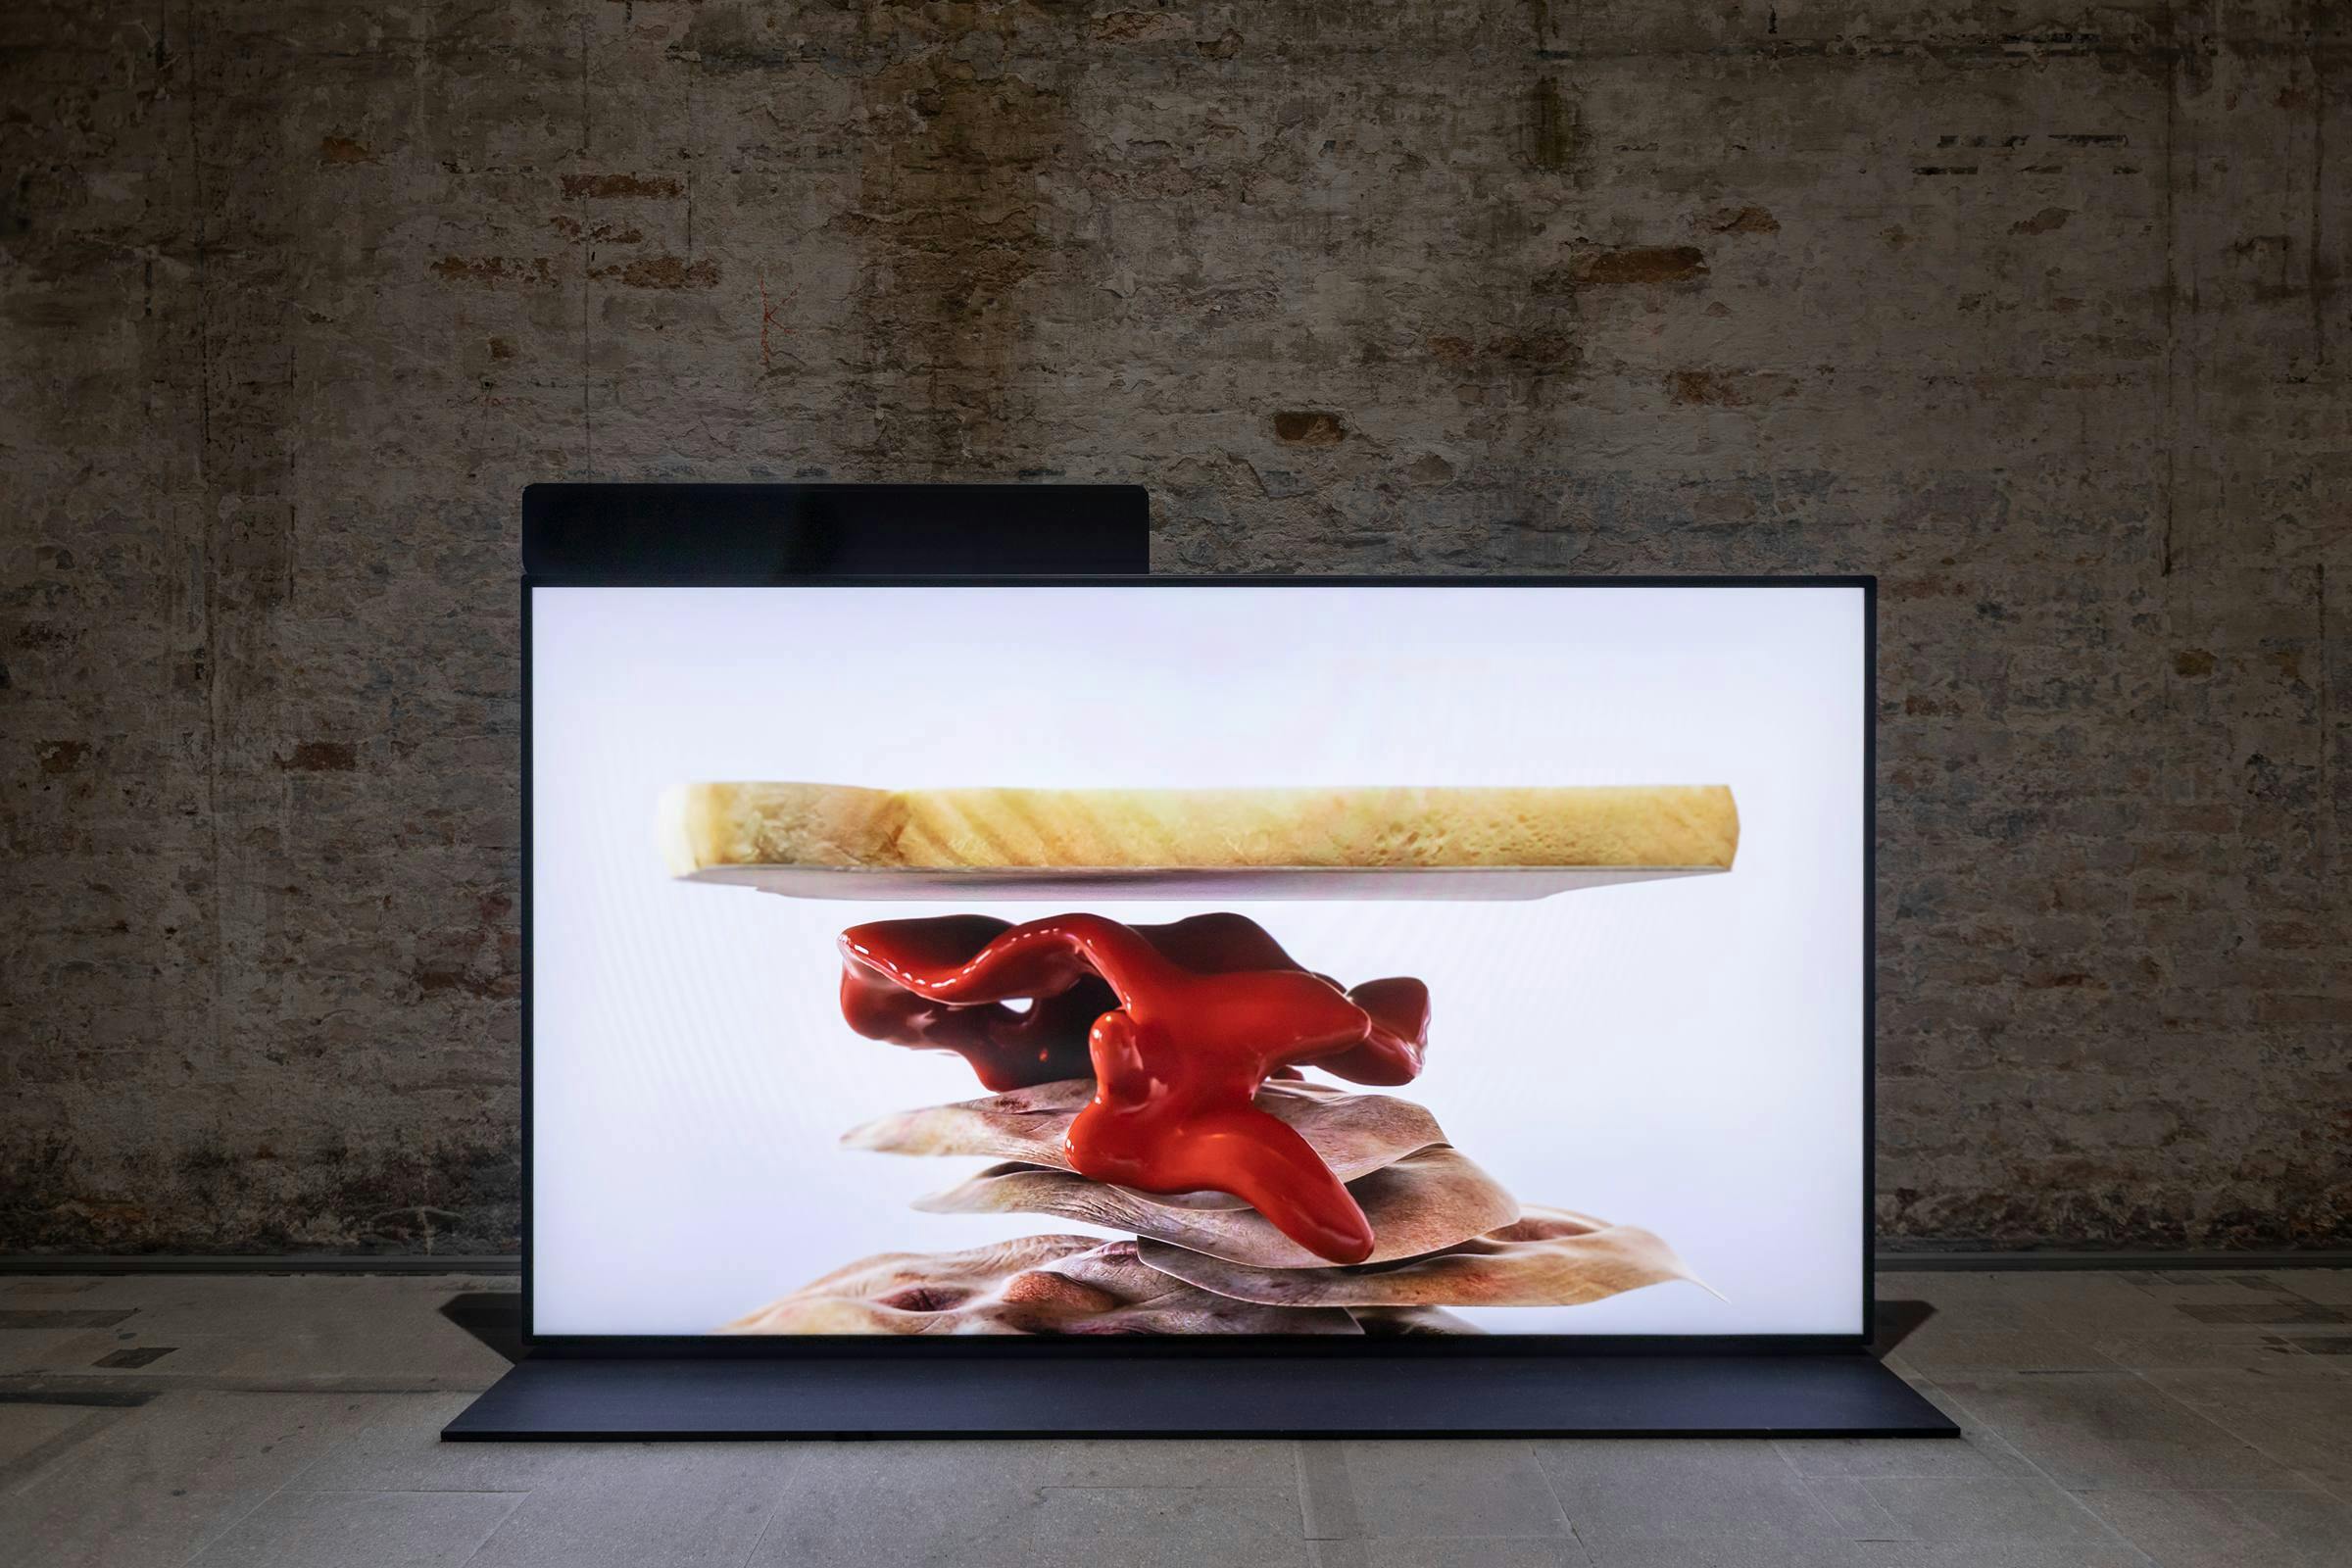 installation view of Untitled by Ed Aktins. The work is playing on a free standing screen installed in an industrial space